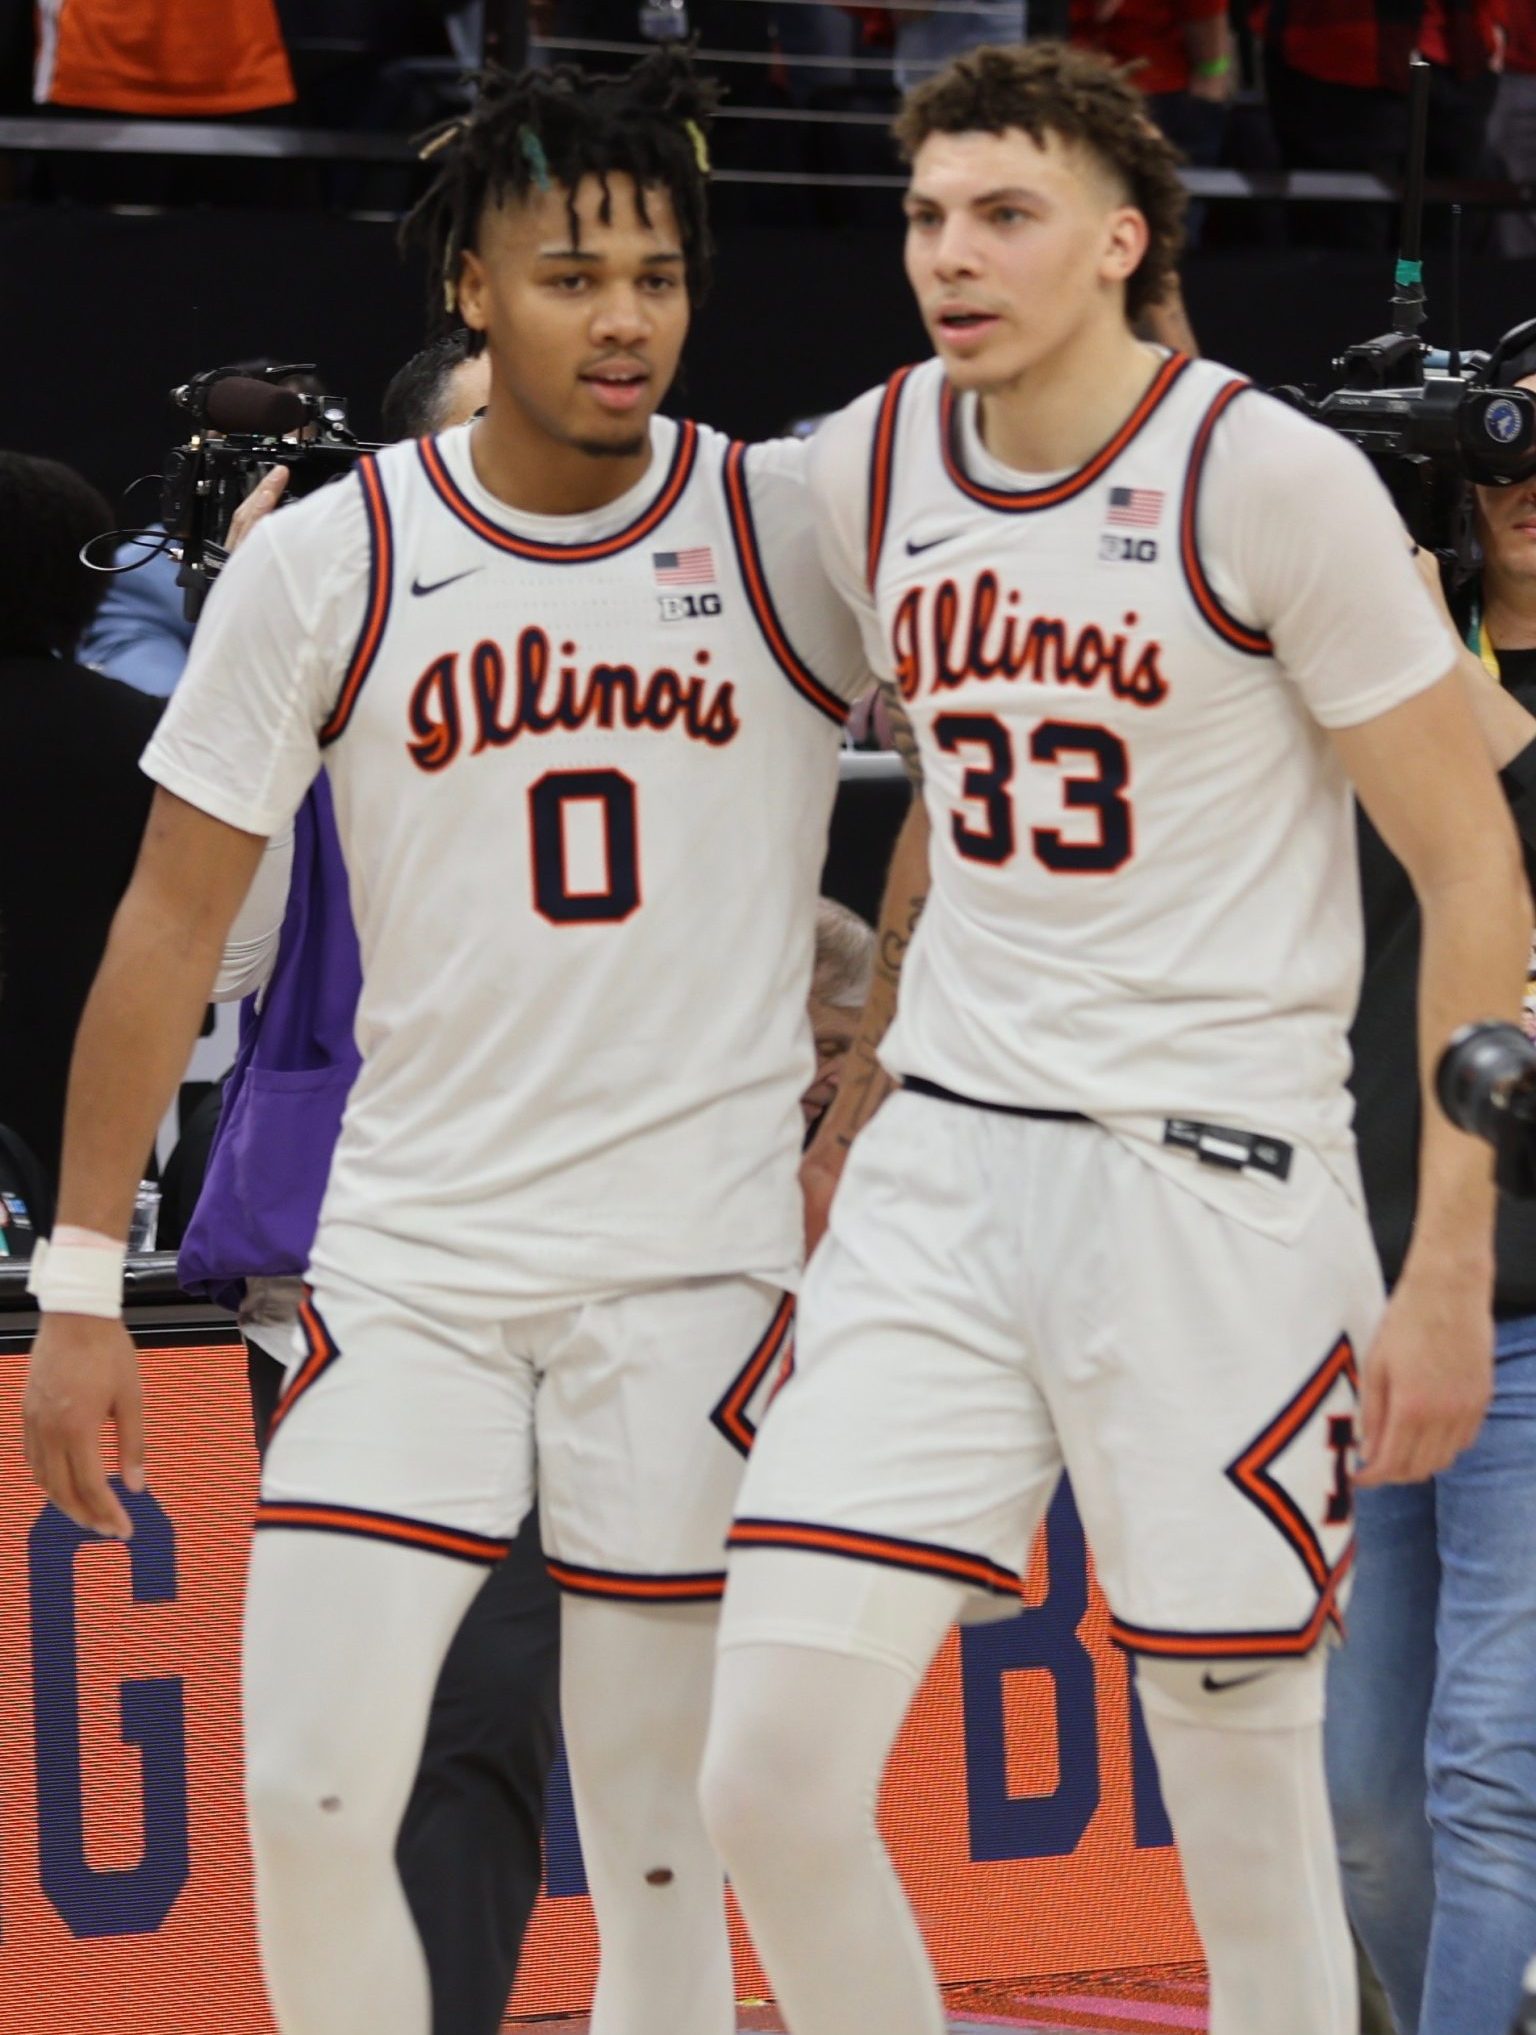 Coleman Hawkins Continues Playing Through Pain in Illini’s NCAA Tournament Run